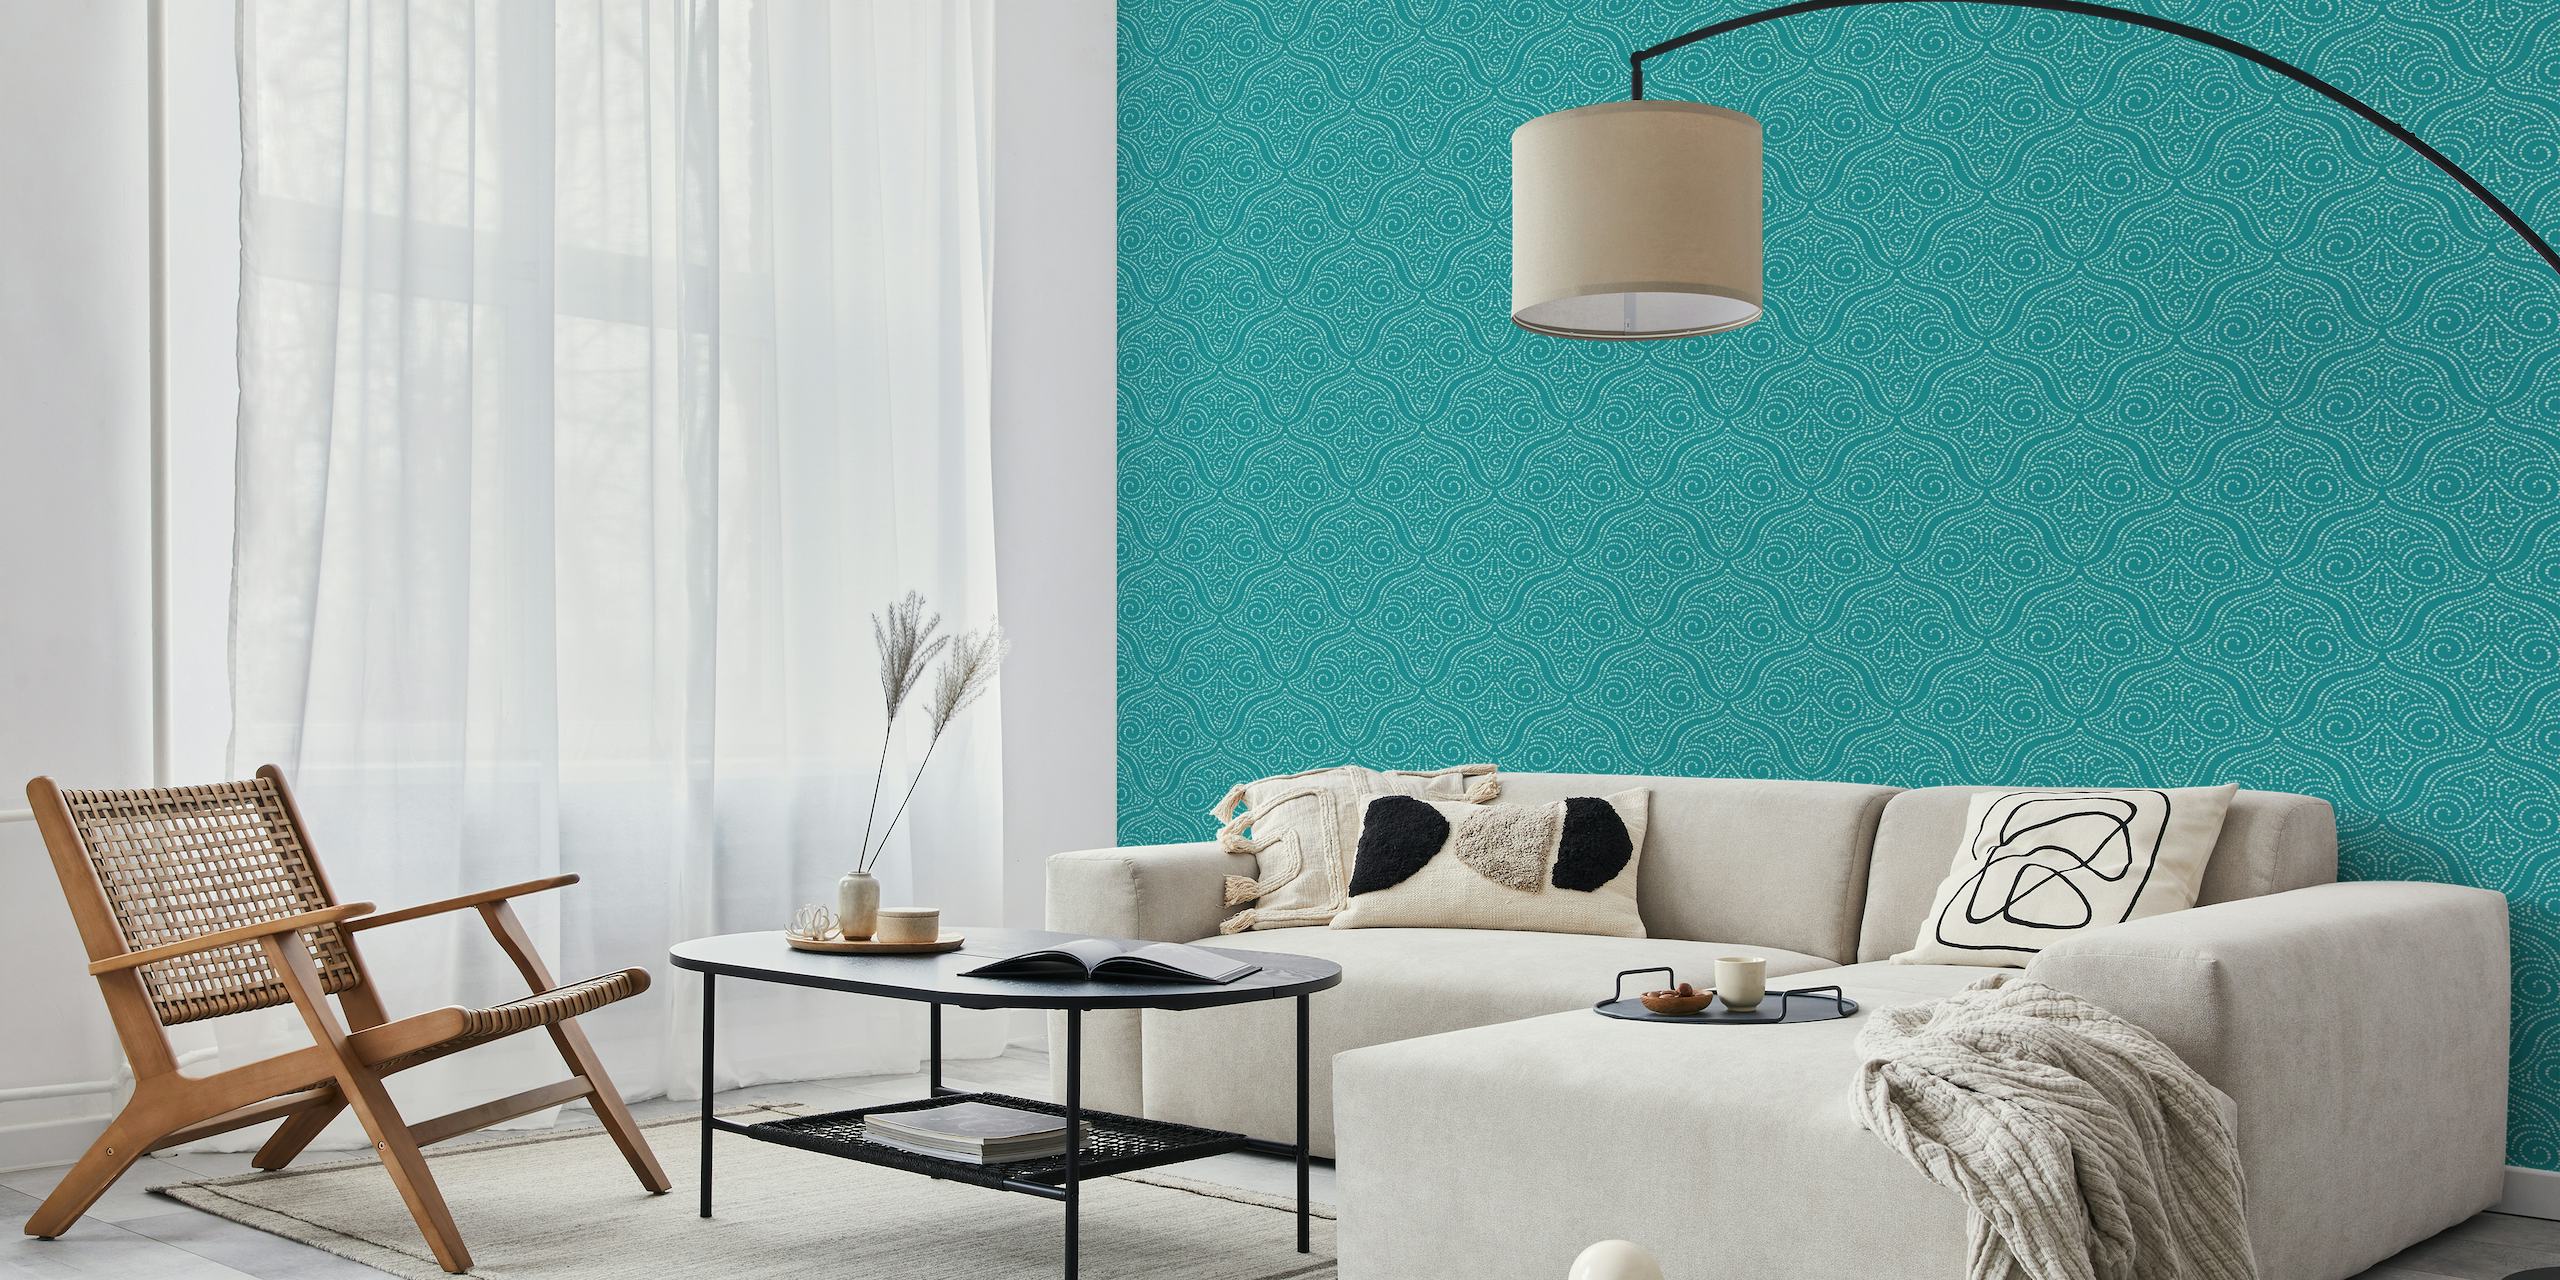 Inky Depths: Dark Turquoise Abstract Dot Fusion - GD23-A18 wallpaper